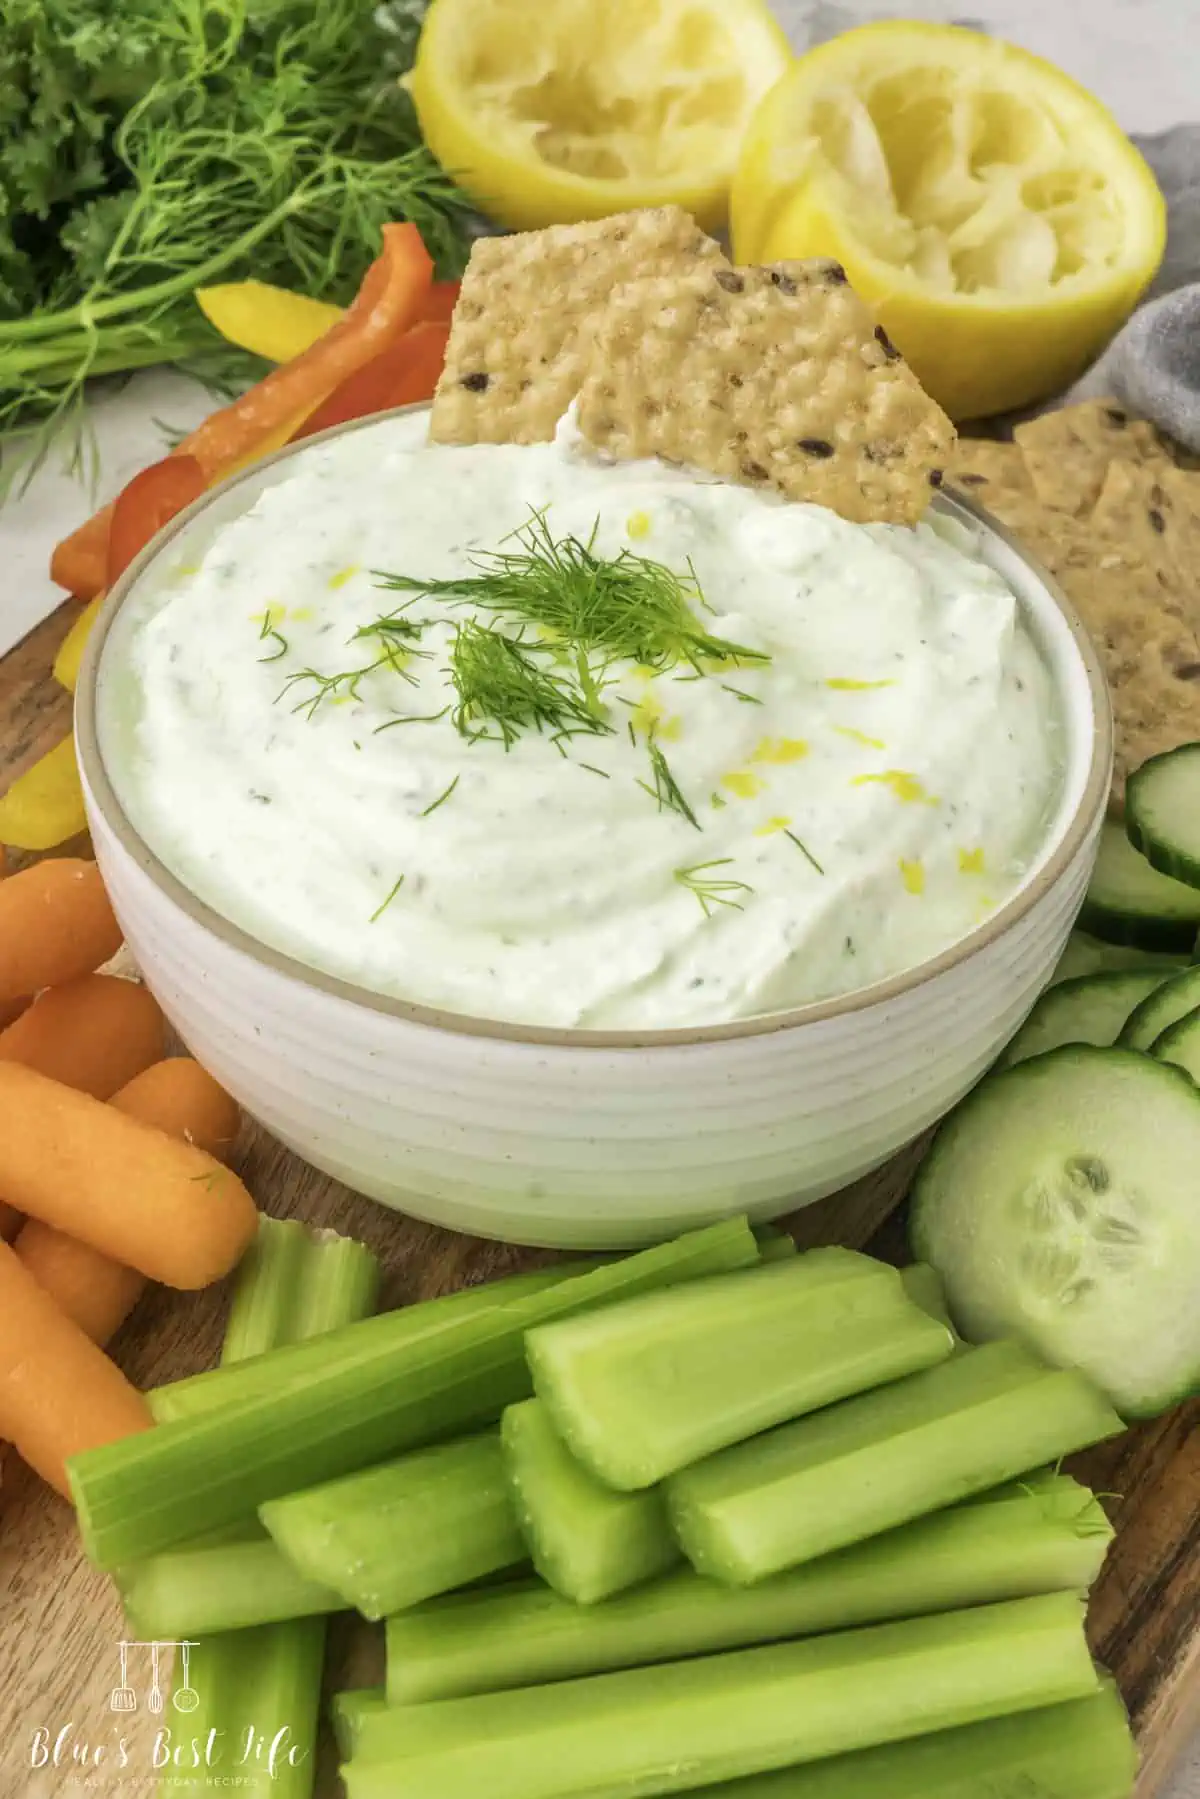 The cottage cheese herb dip with crackers,